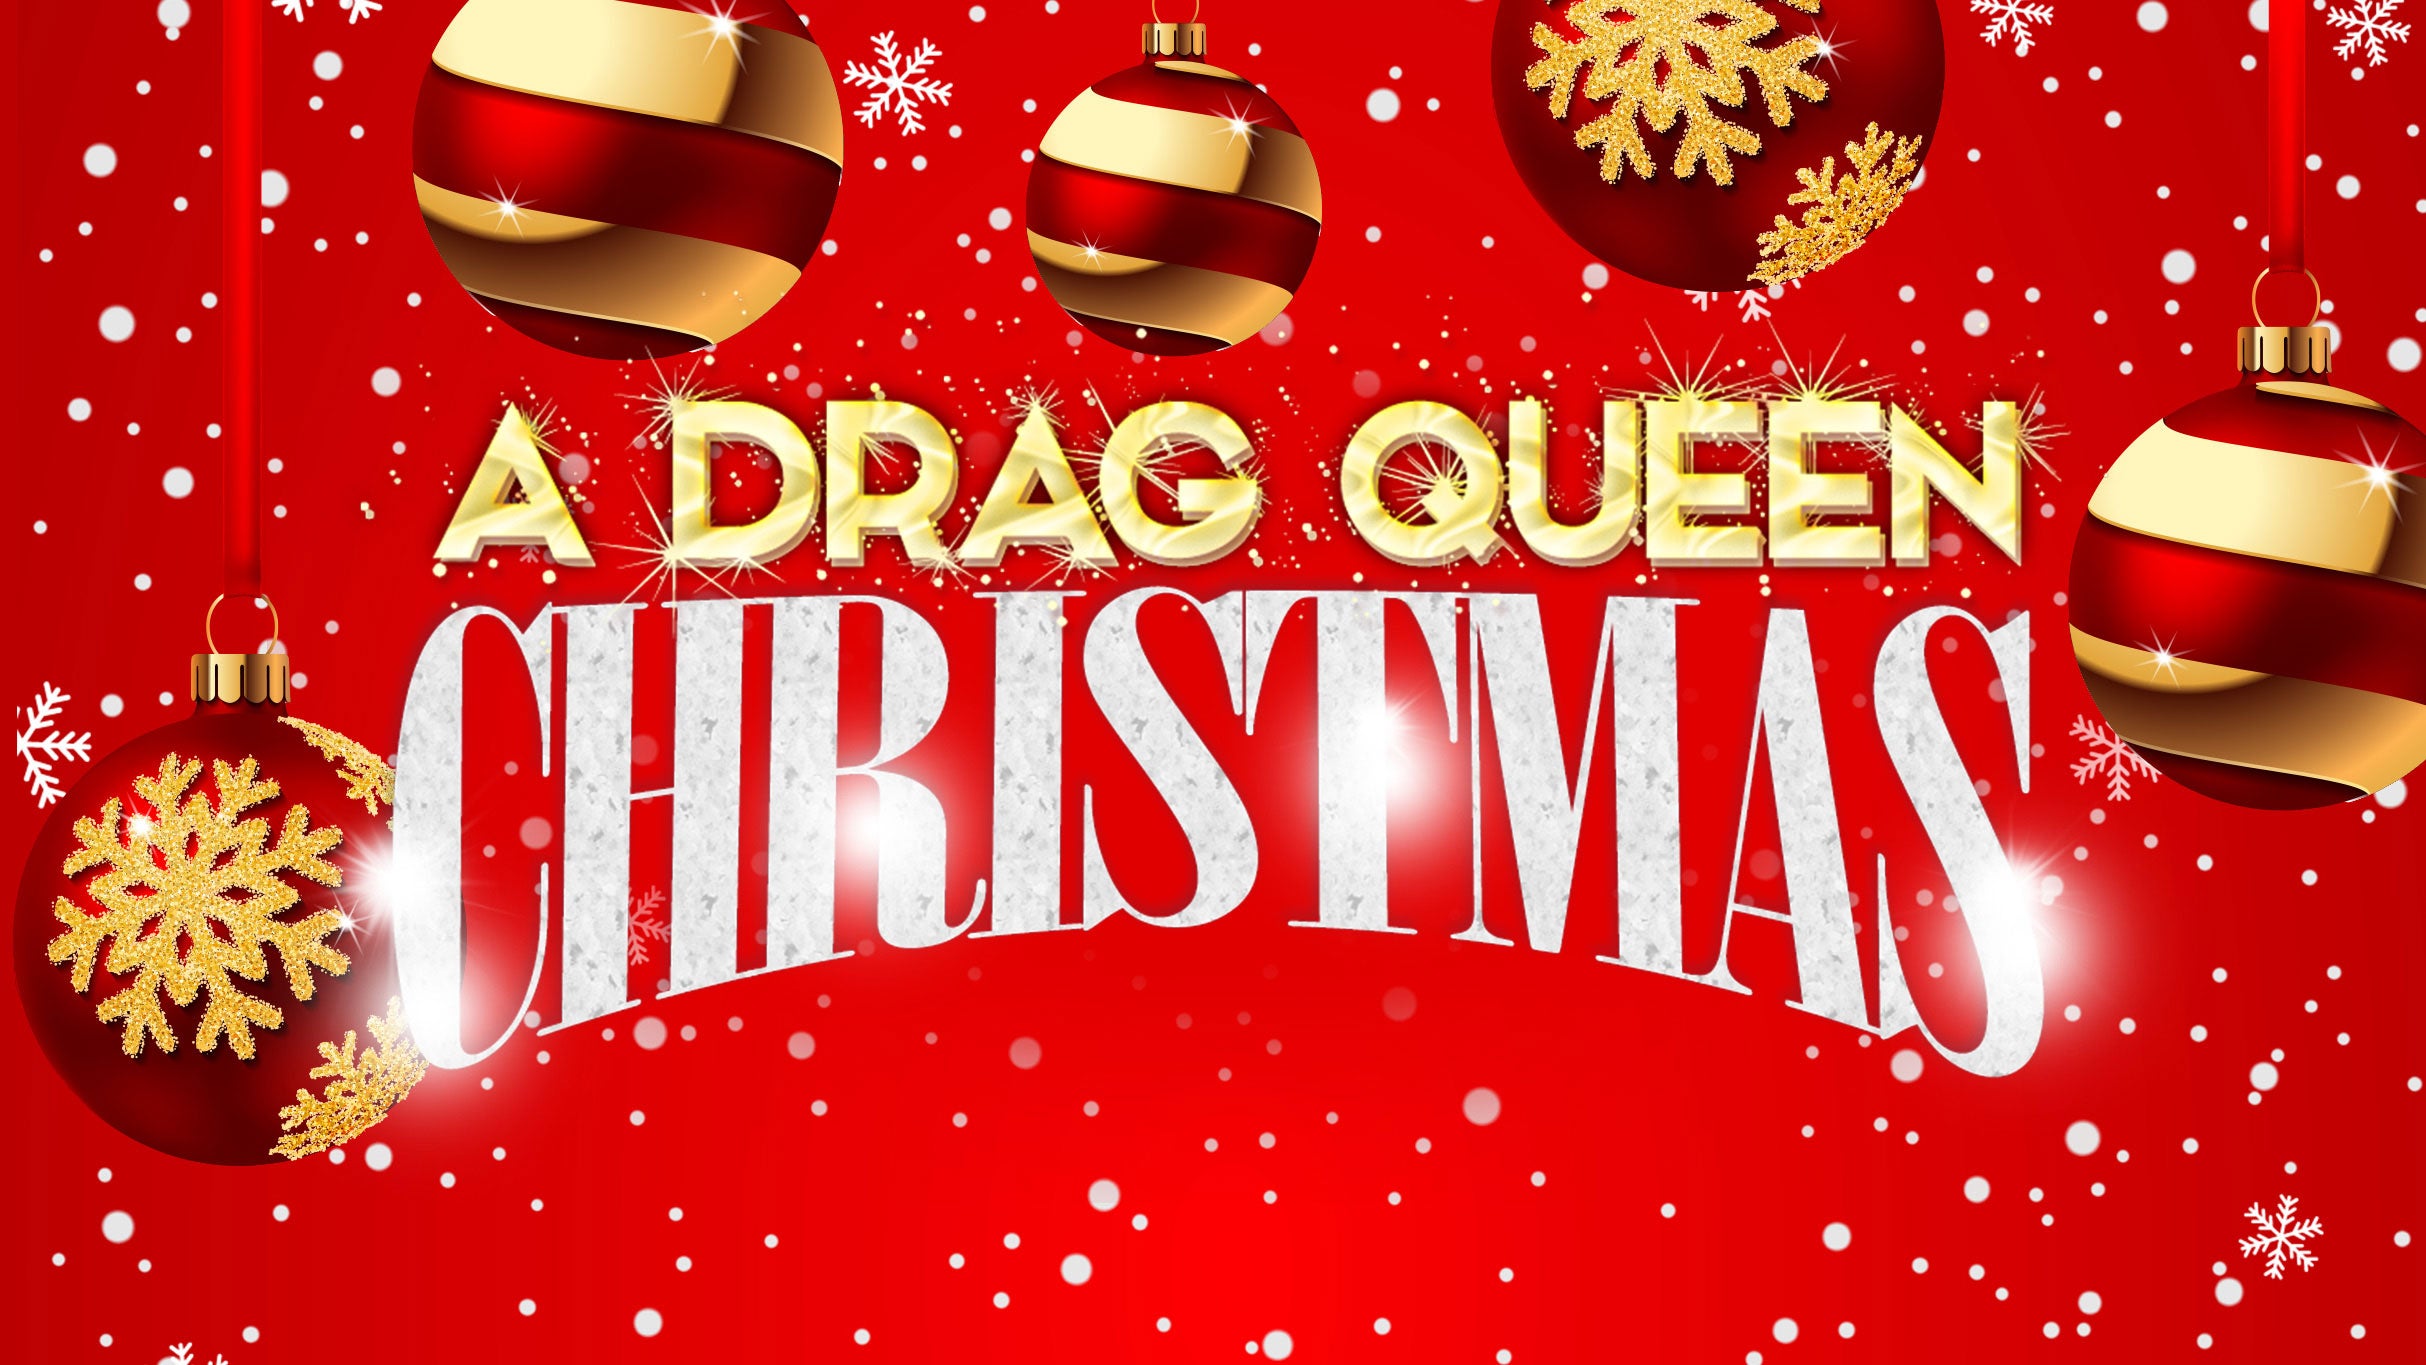 A Drag Queen Christmas at The Wiltern